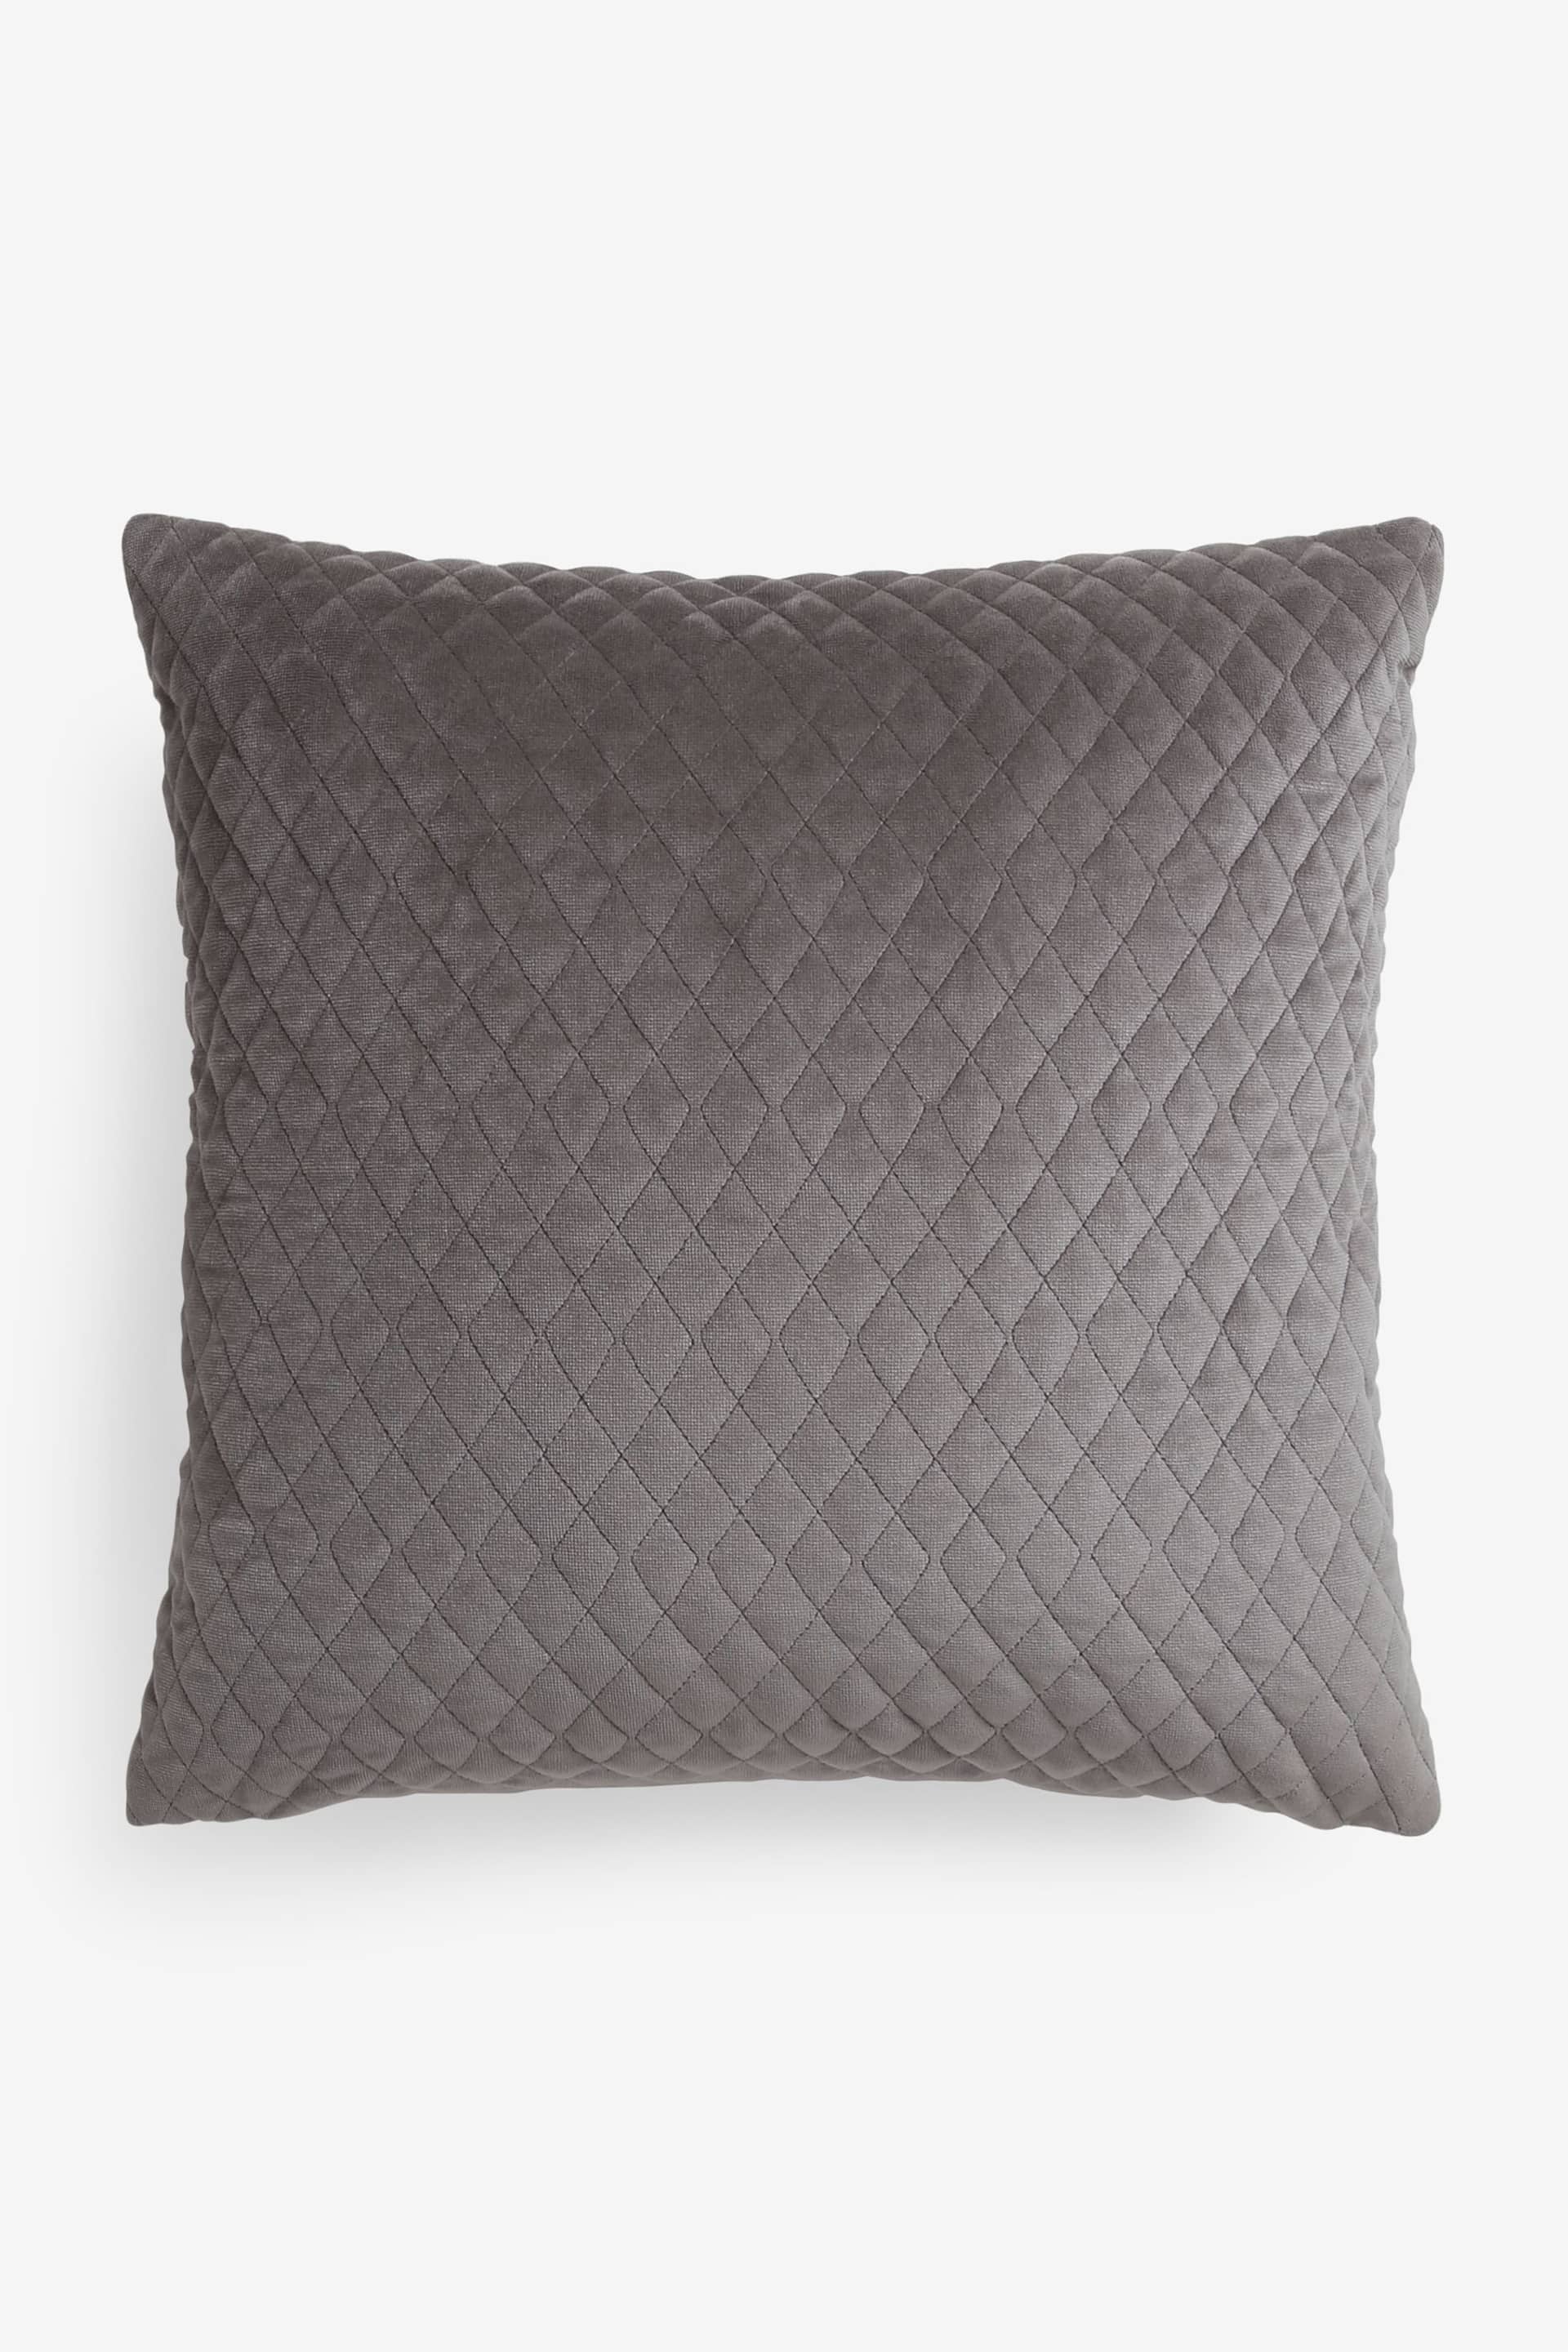 Charcoal Grey Velvet Quilted Hamilton 50 x 50 Cushion - Image 5 of 6